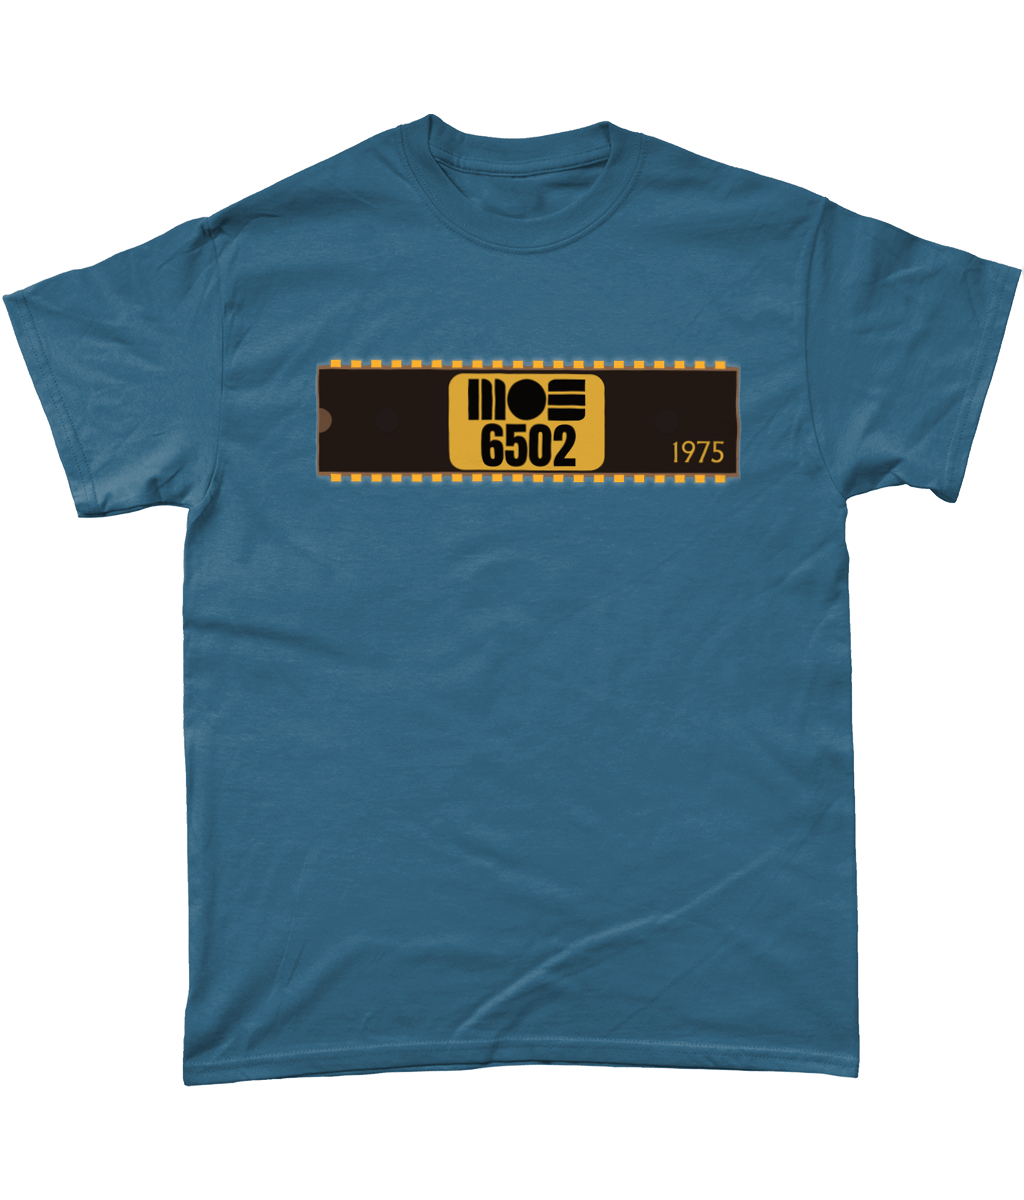 Indigo T-shirt with a basic representation of a 40 pin chip across the front with MOS 6502 and 1975 written on it.